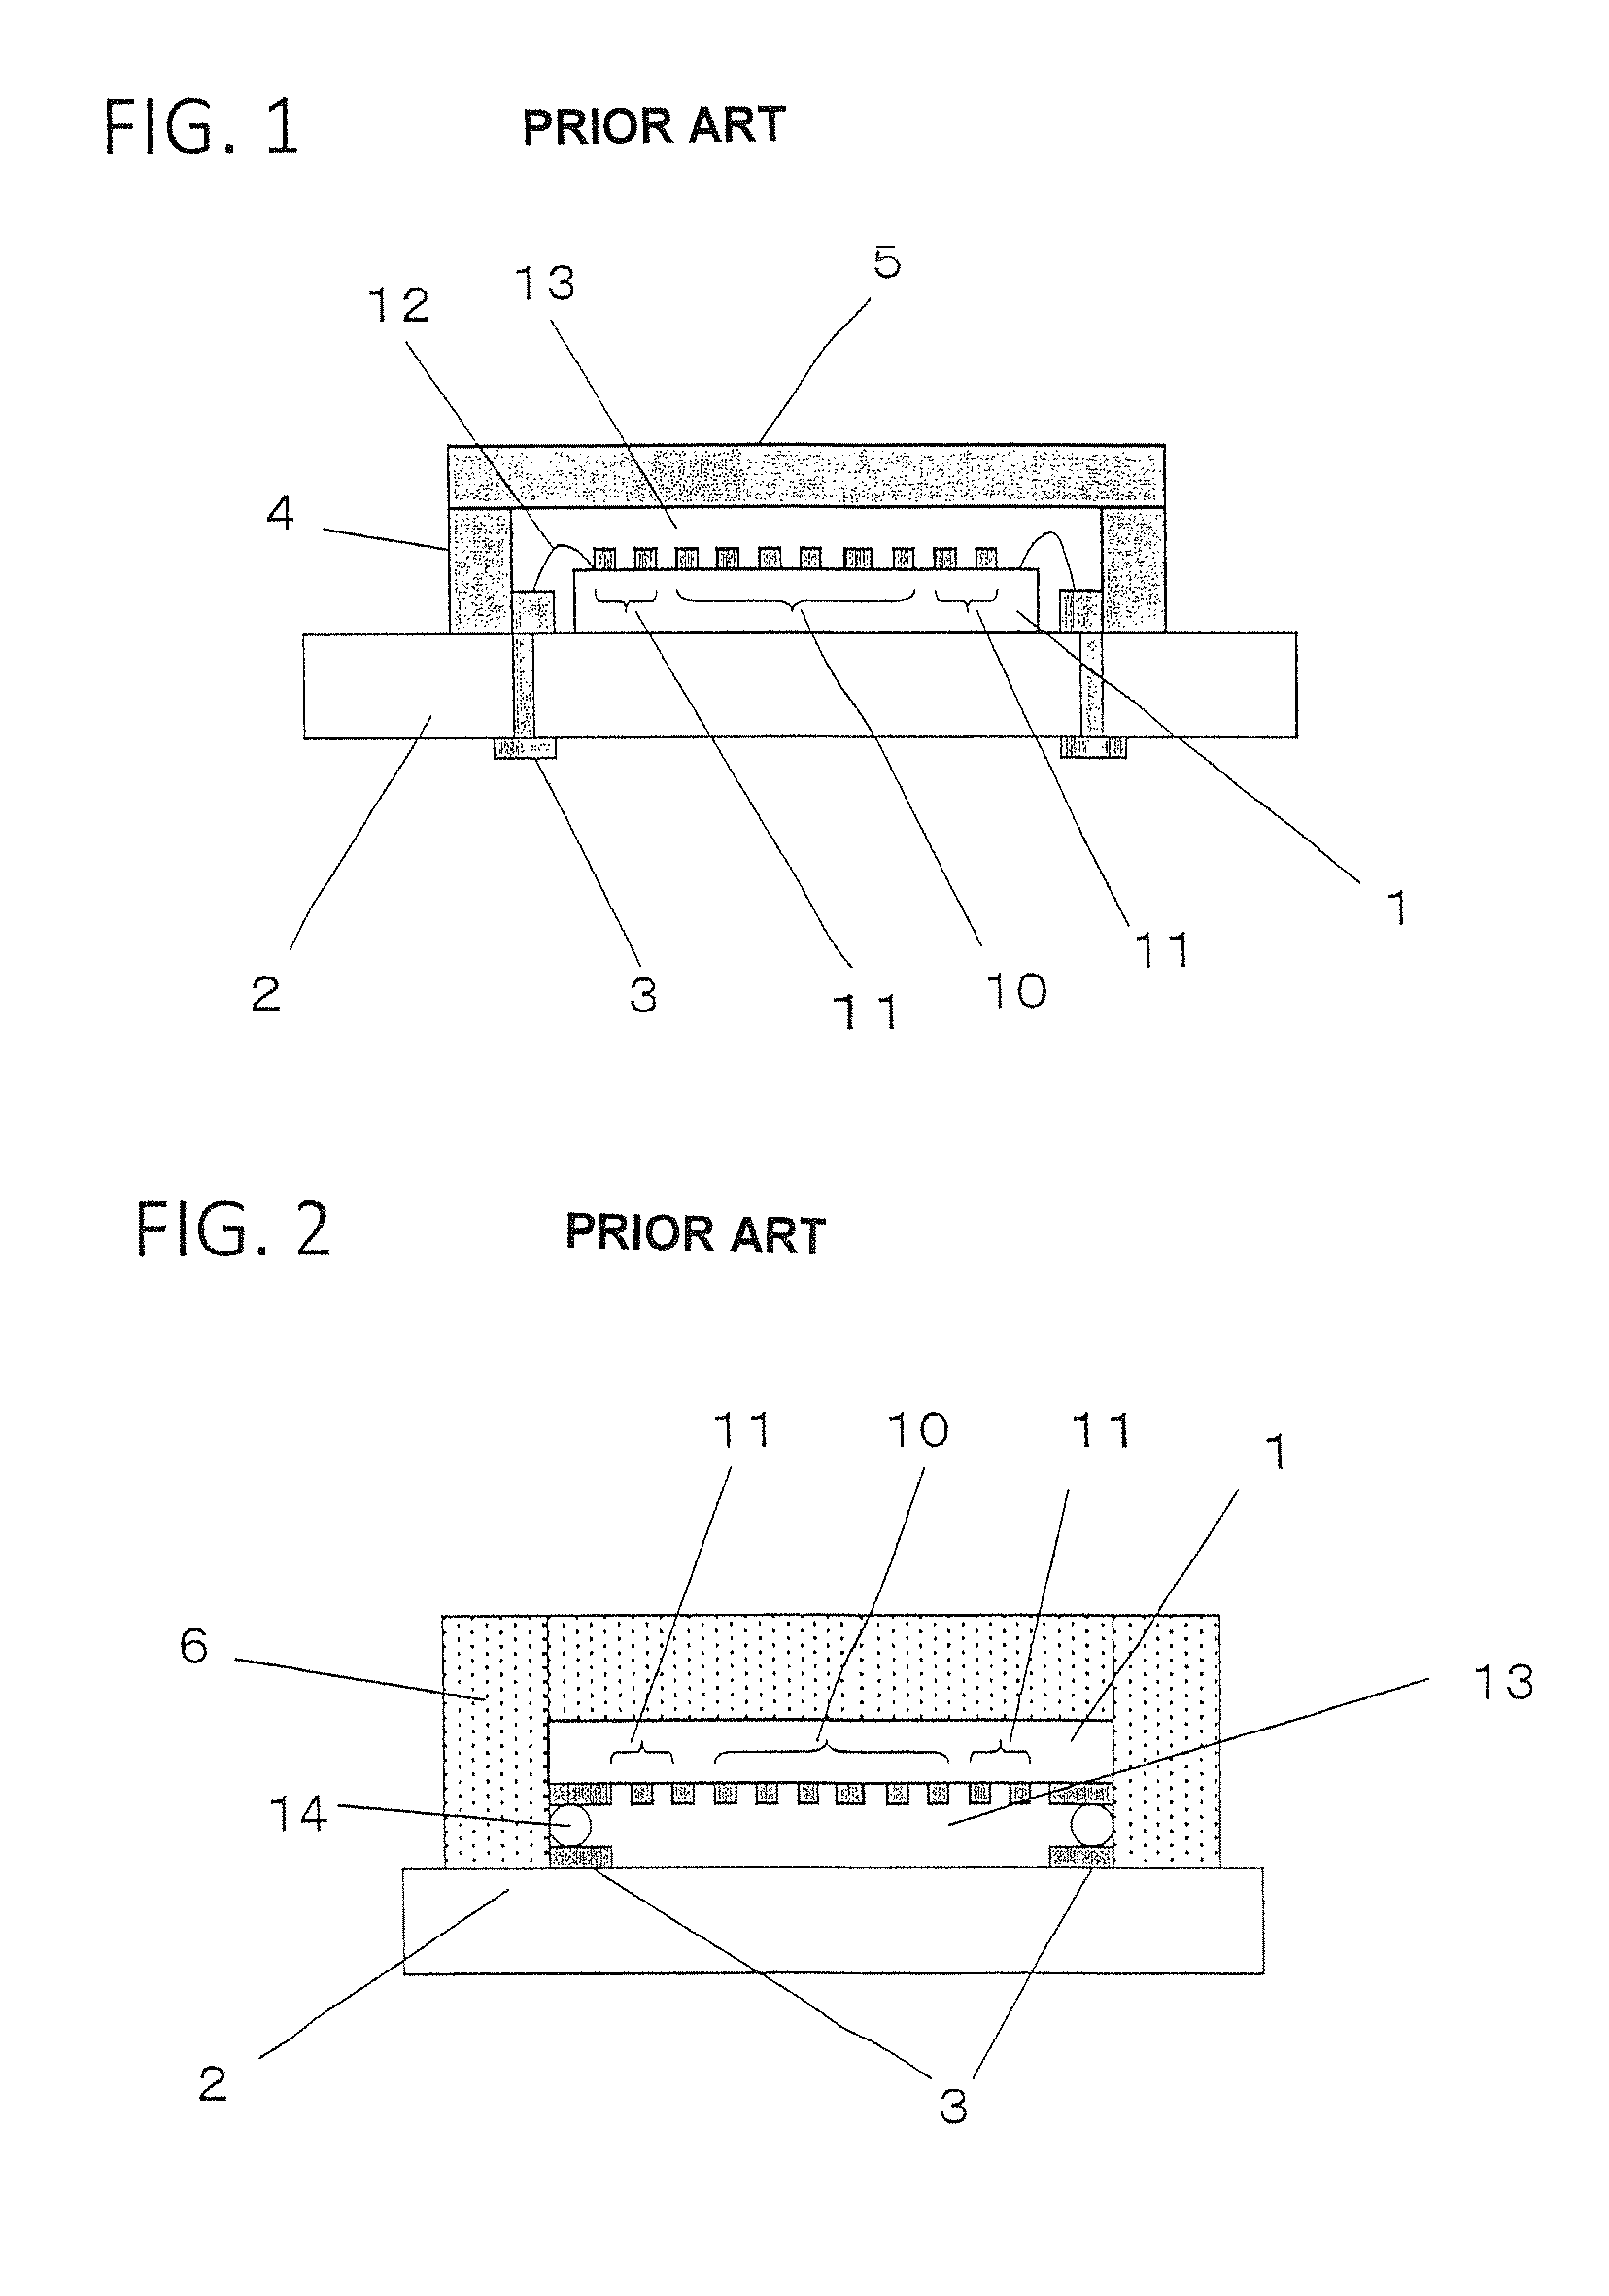 Method of manufacturing a surface acoustic wave device